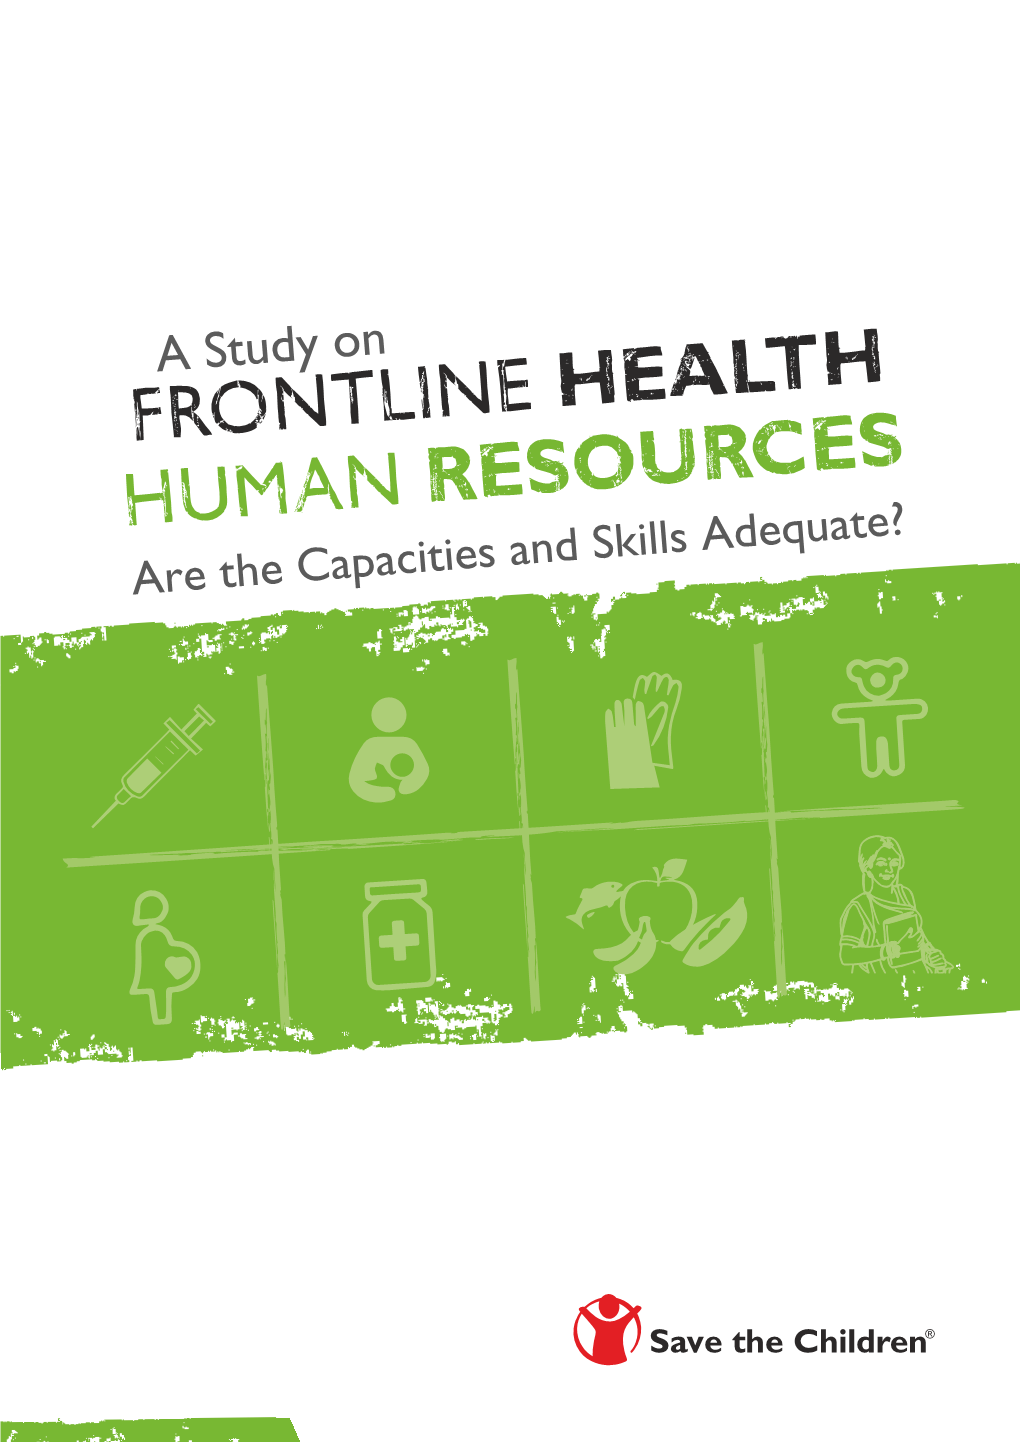 A Study on Frontline Health Human Resources